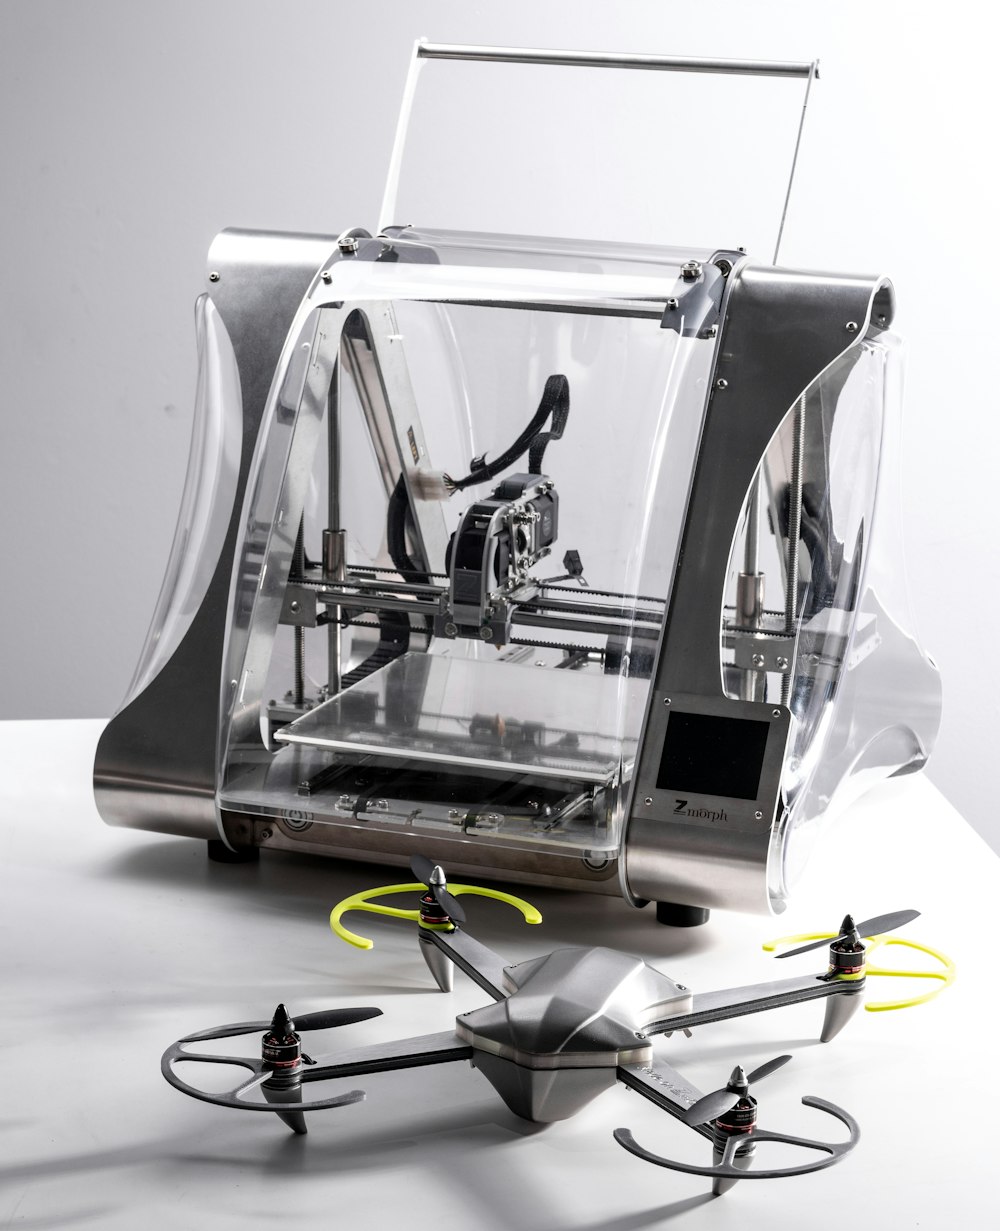 gray 3D printer by drone on tablee